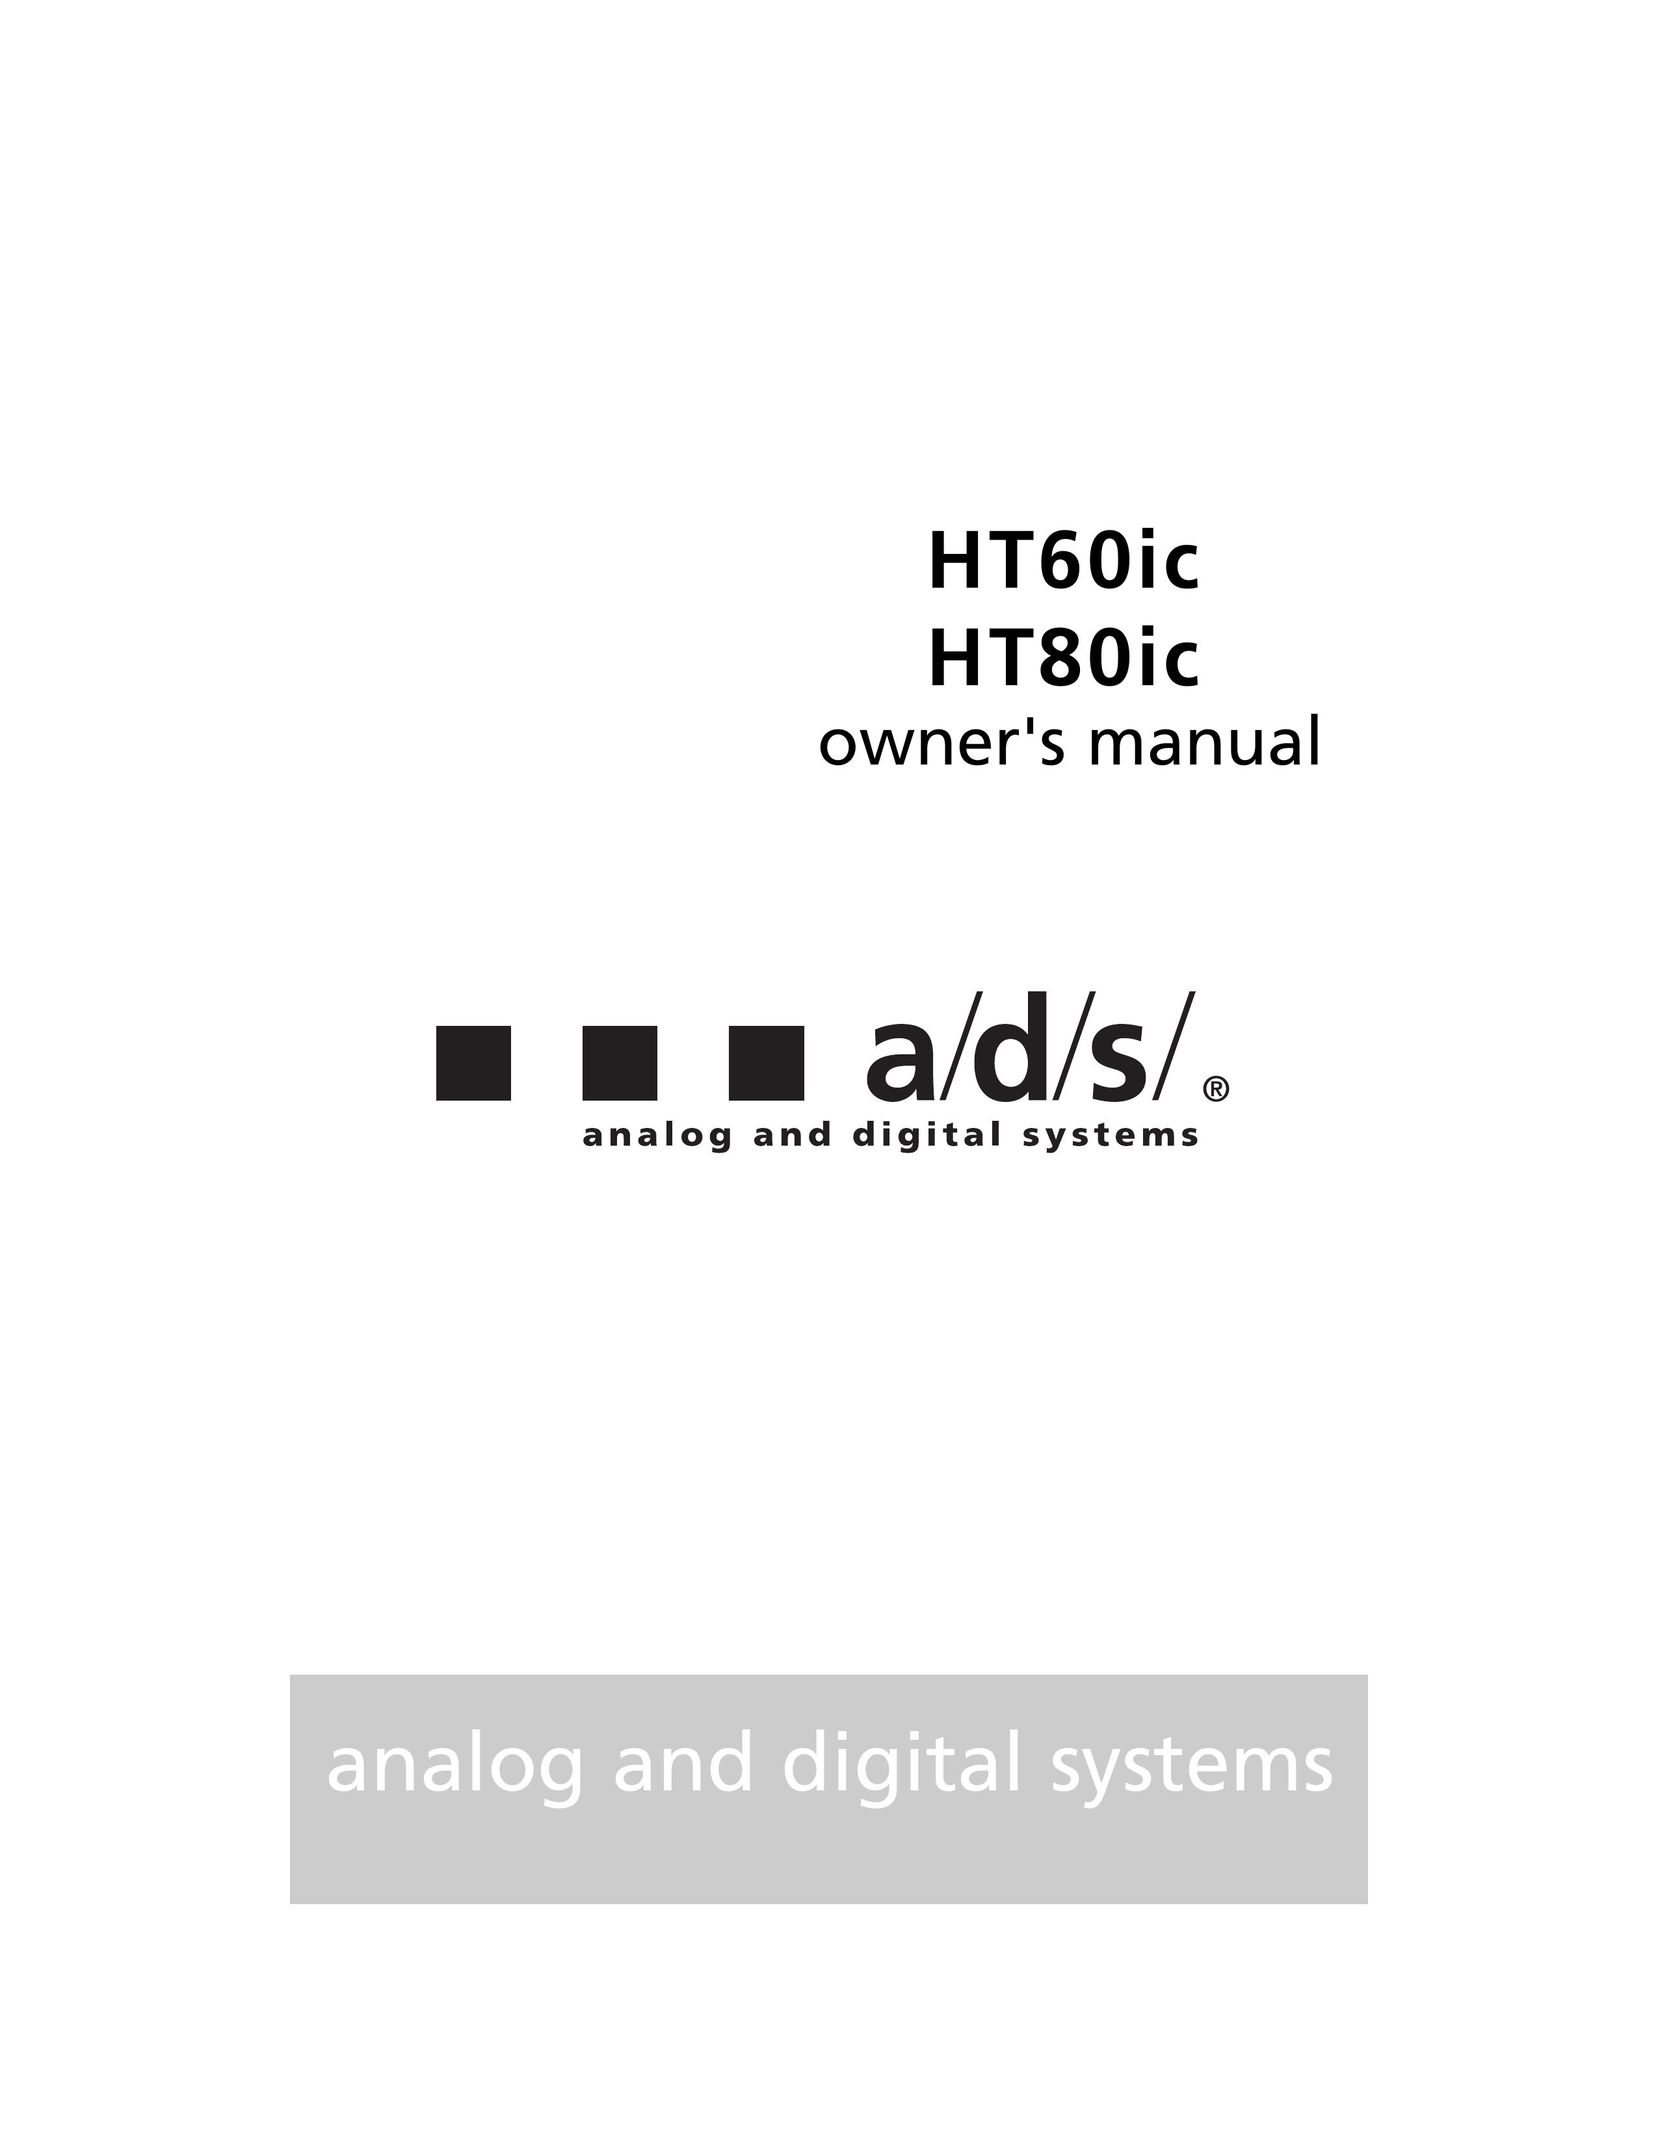 ADS Technologies HT80IC Speaker User Manual (Page 1)